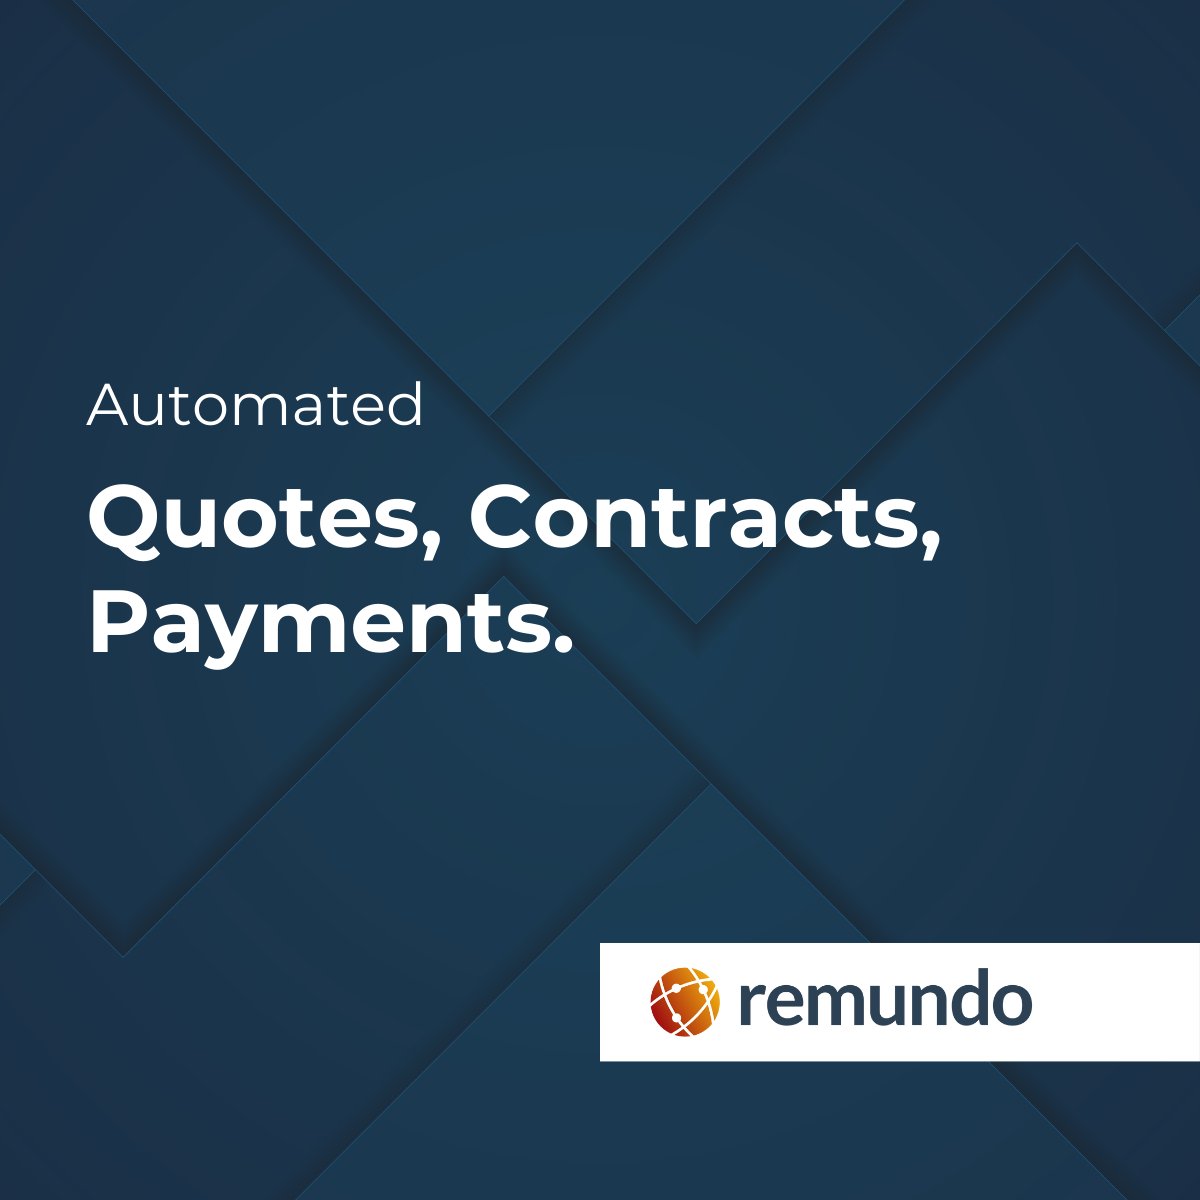 Looking to hire across borders?

Remundo platform can automate everything, saving you time and hassle. Learn more:

#EmployerOfRecord #EOR #GlobalHR #GlobalWorkforceManagement